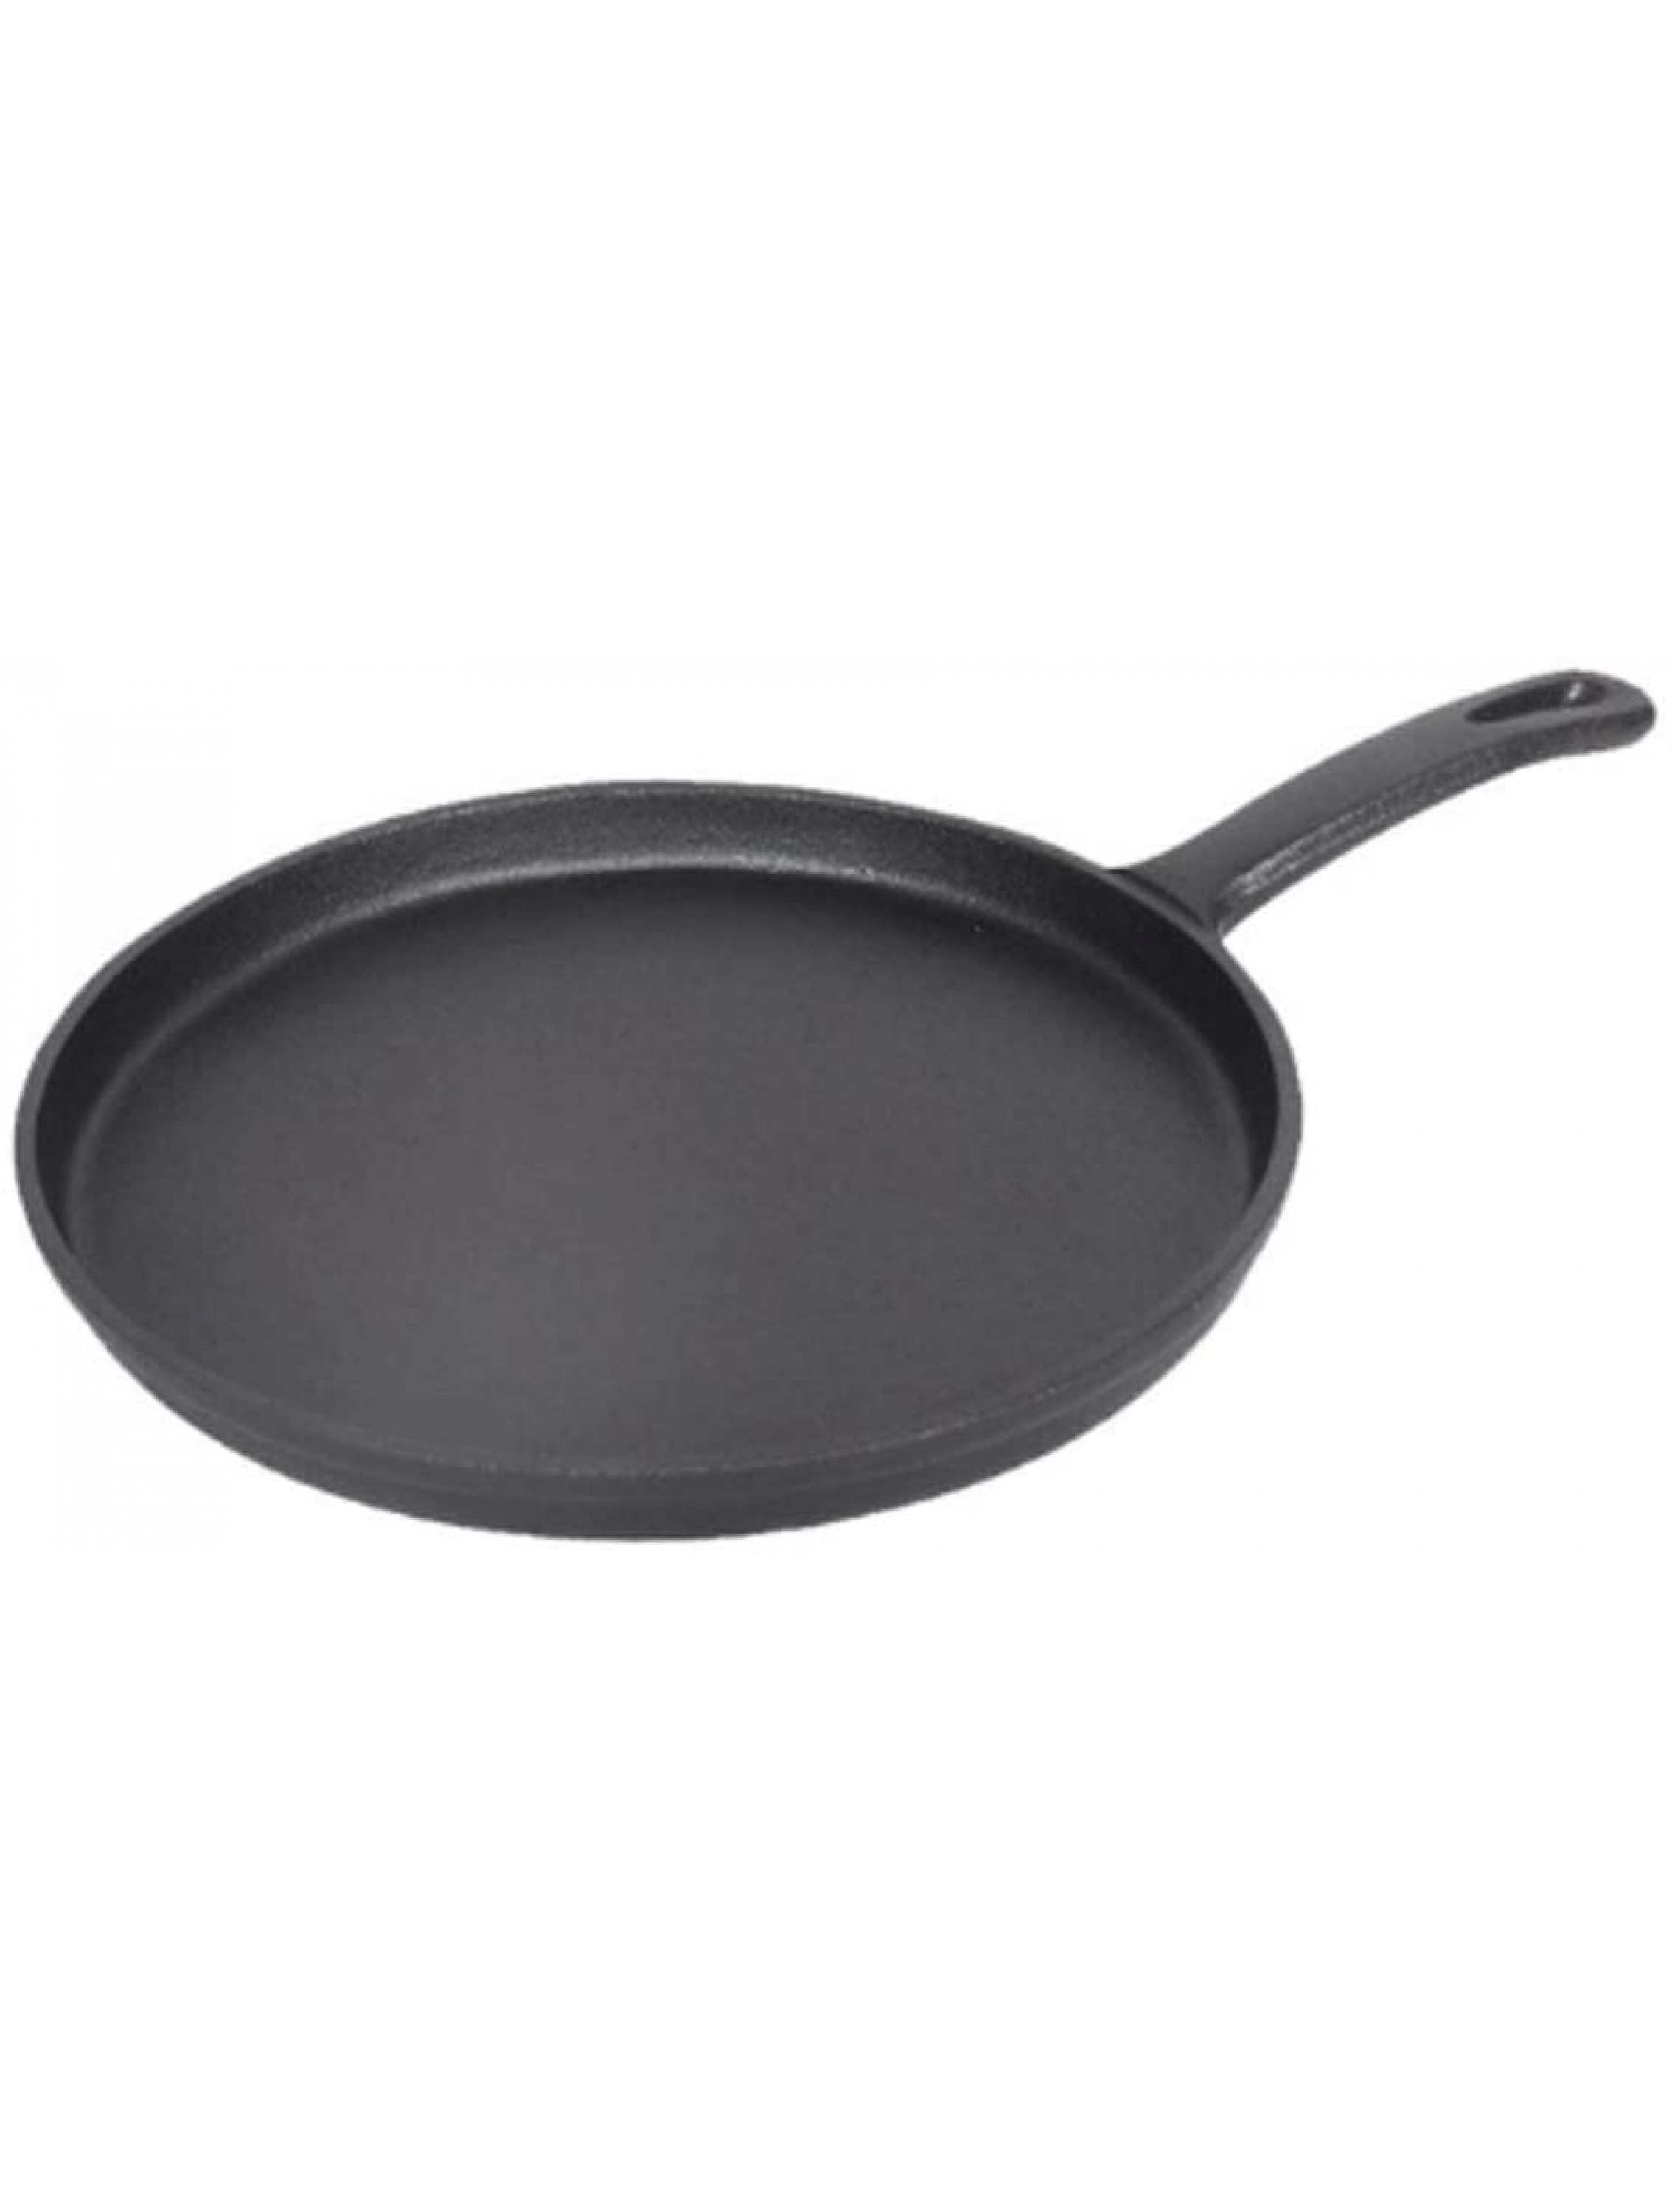 GHBNK 26cm Thickened Cast Iron Non-stick Frying Pan Layer-cake Cake Pancake Crepe Maker Flat Pan Griddle Breakfast Omelet Baking Pans - B5PM3DI4V